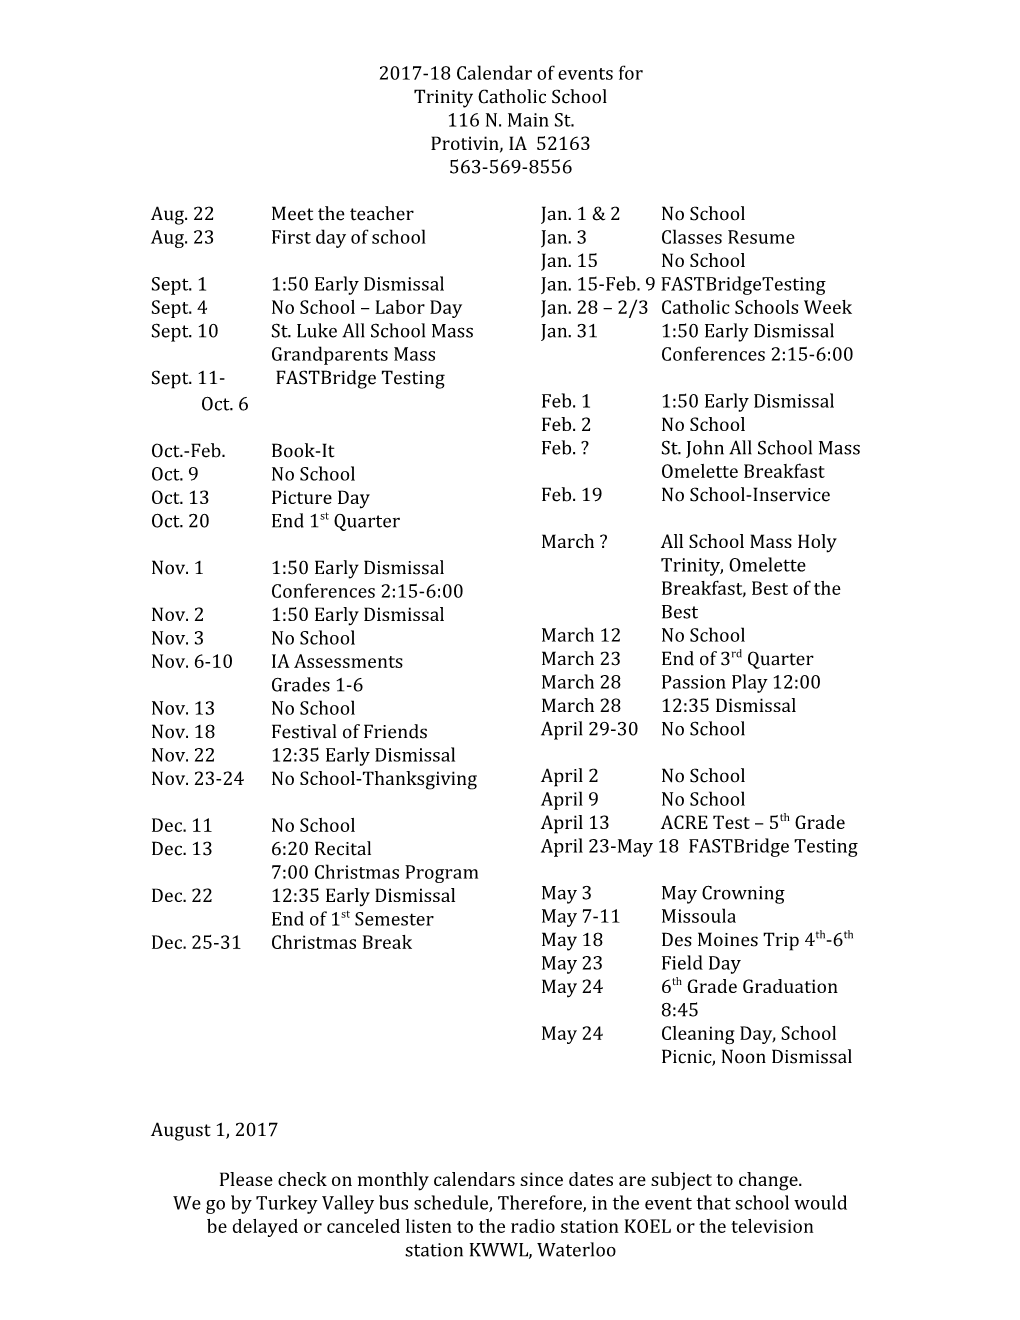 2017-18 Calendar of Events For